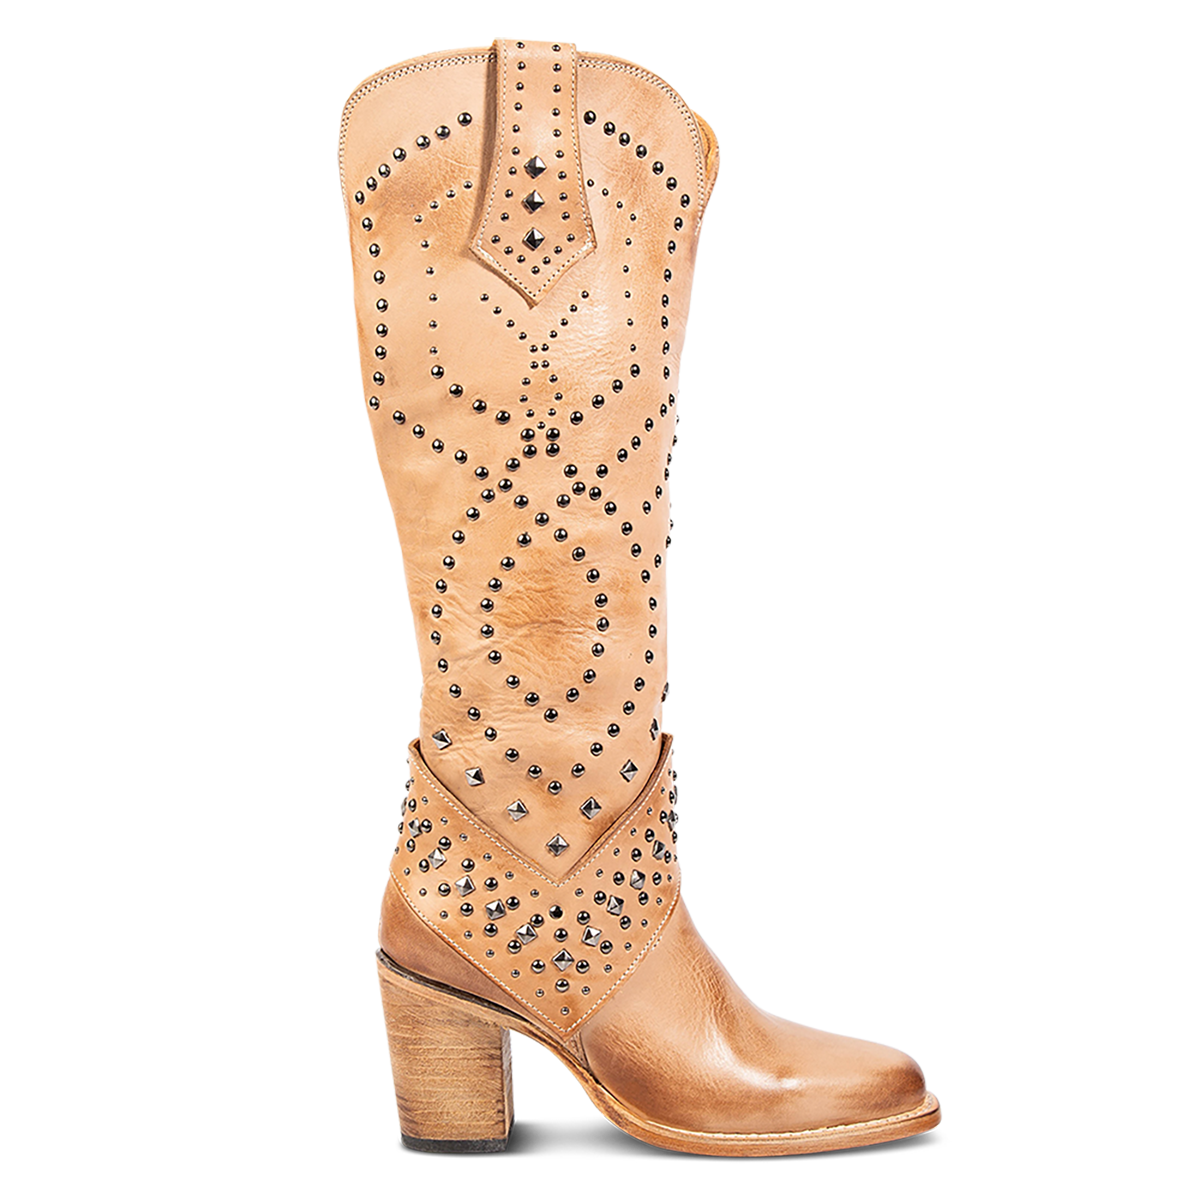 FREEBIRD women's Pamela beige leather boot with silver stud embellishments detailing the shaft, inside working brass zipper and stacked heel